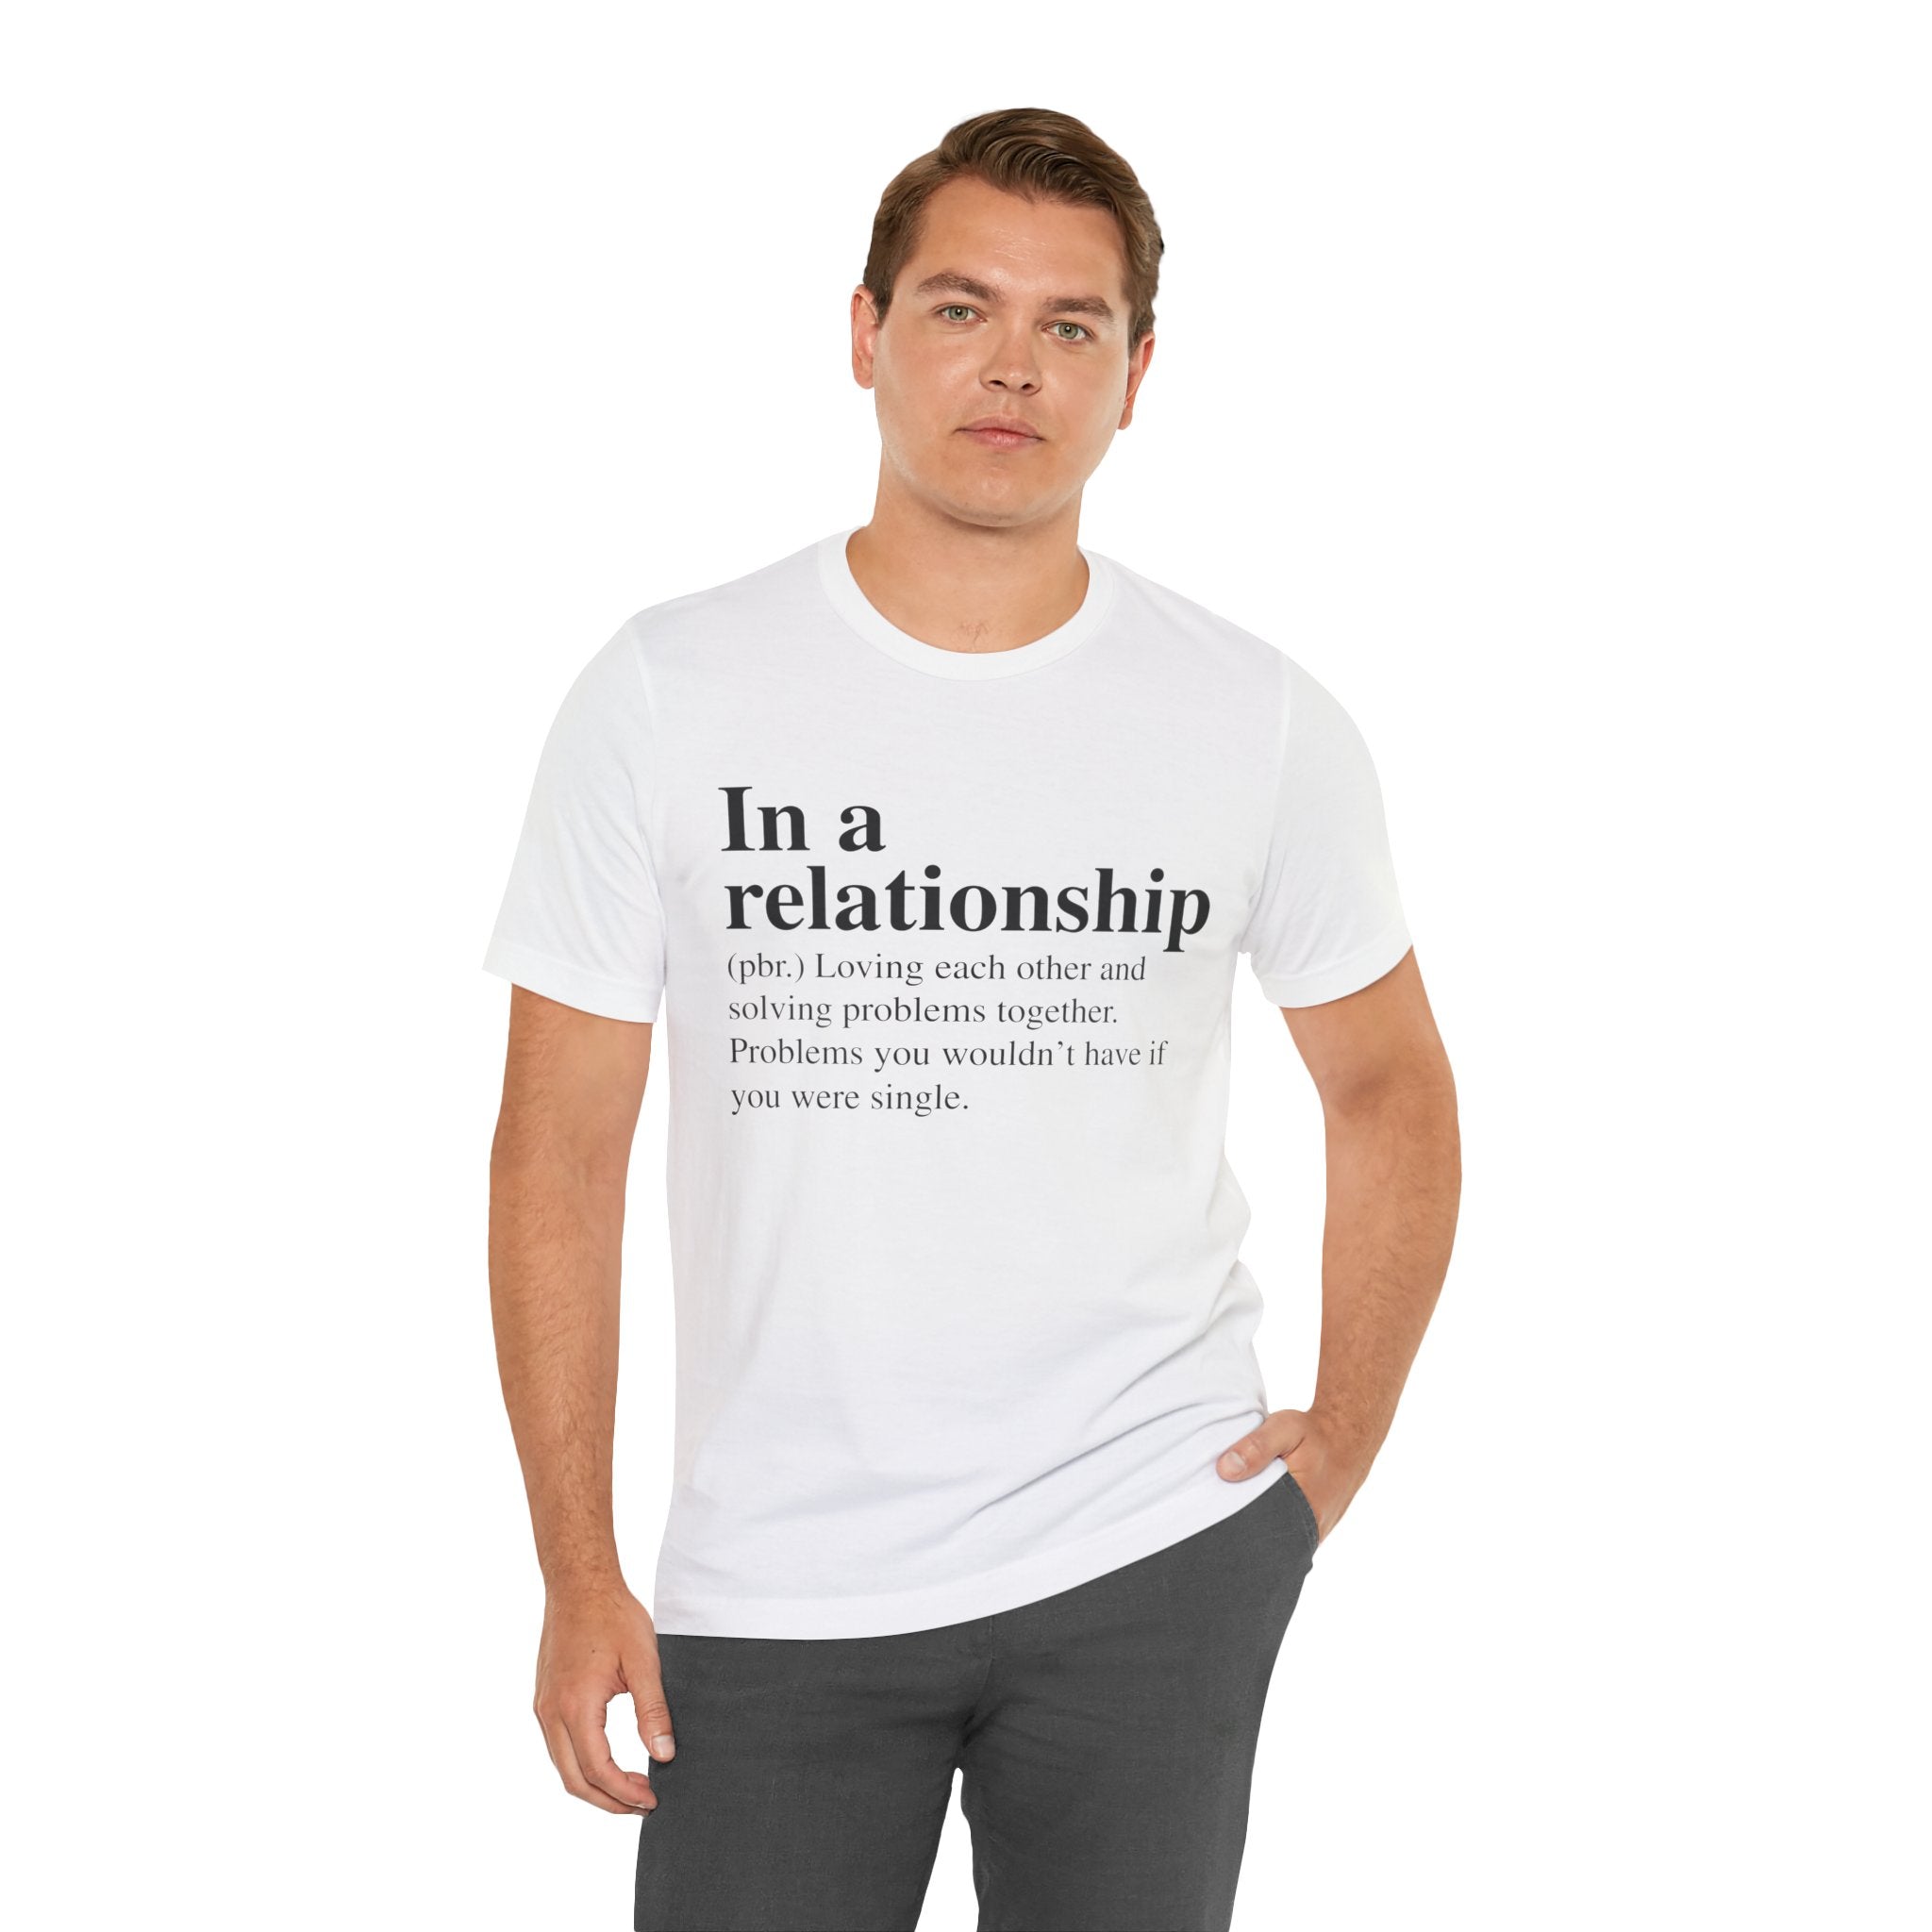 A man wearing an In a Relationship T-Shirt stands against a plain background.